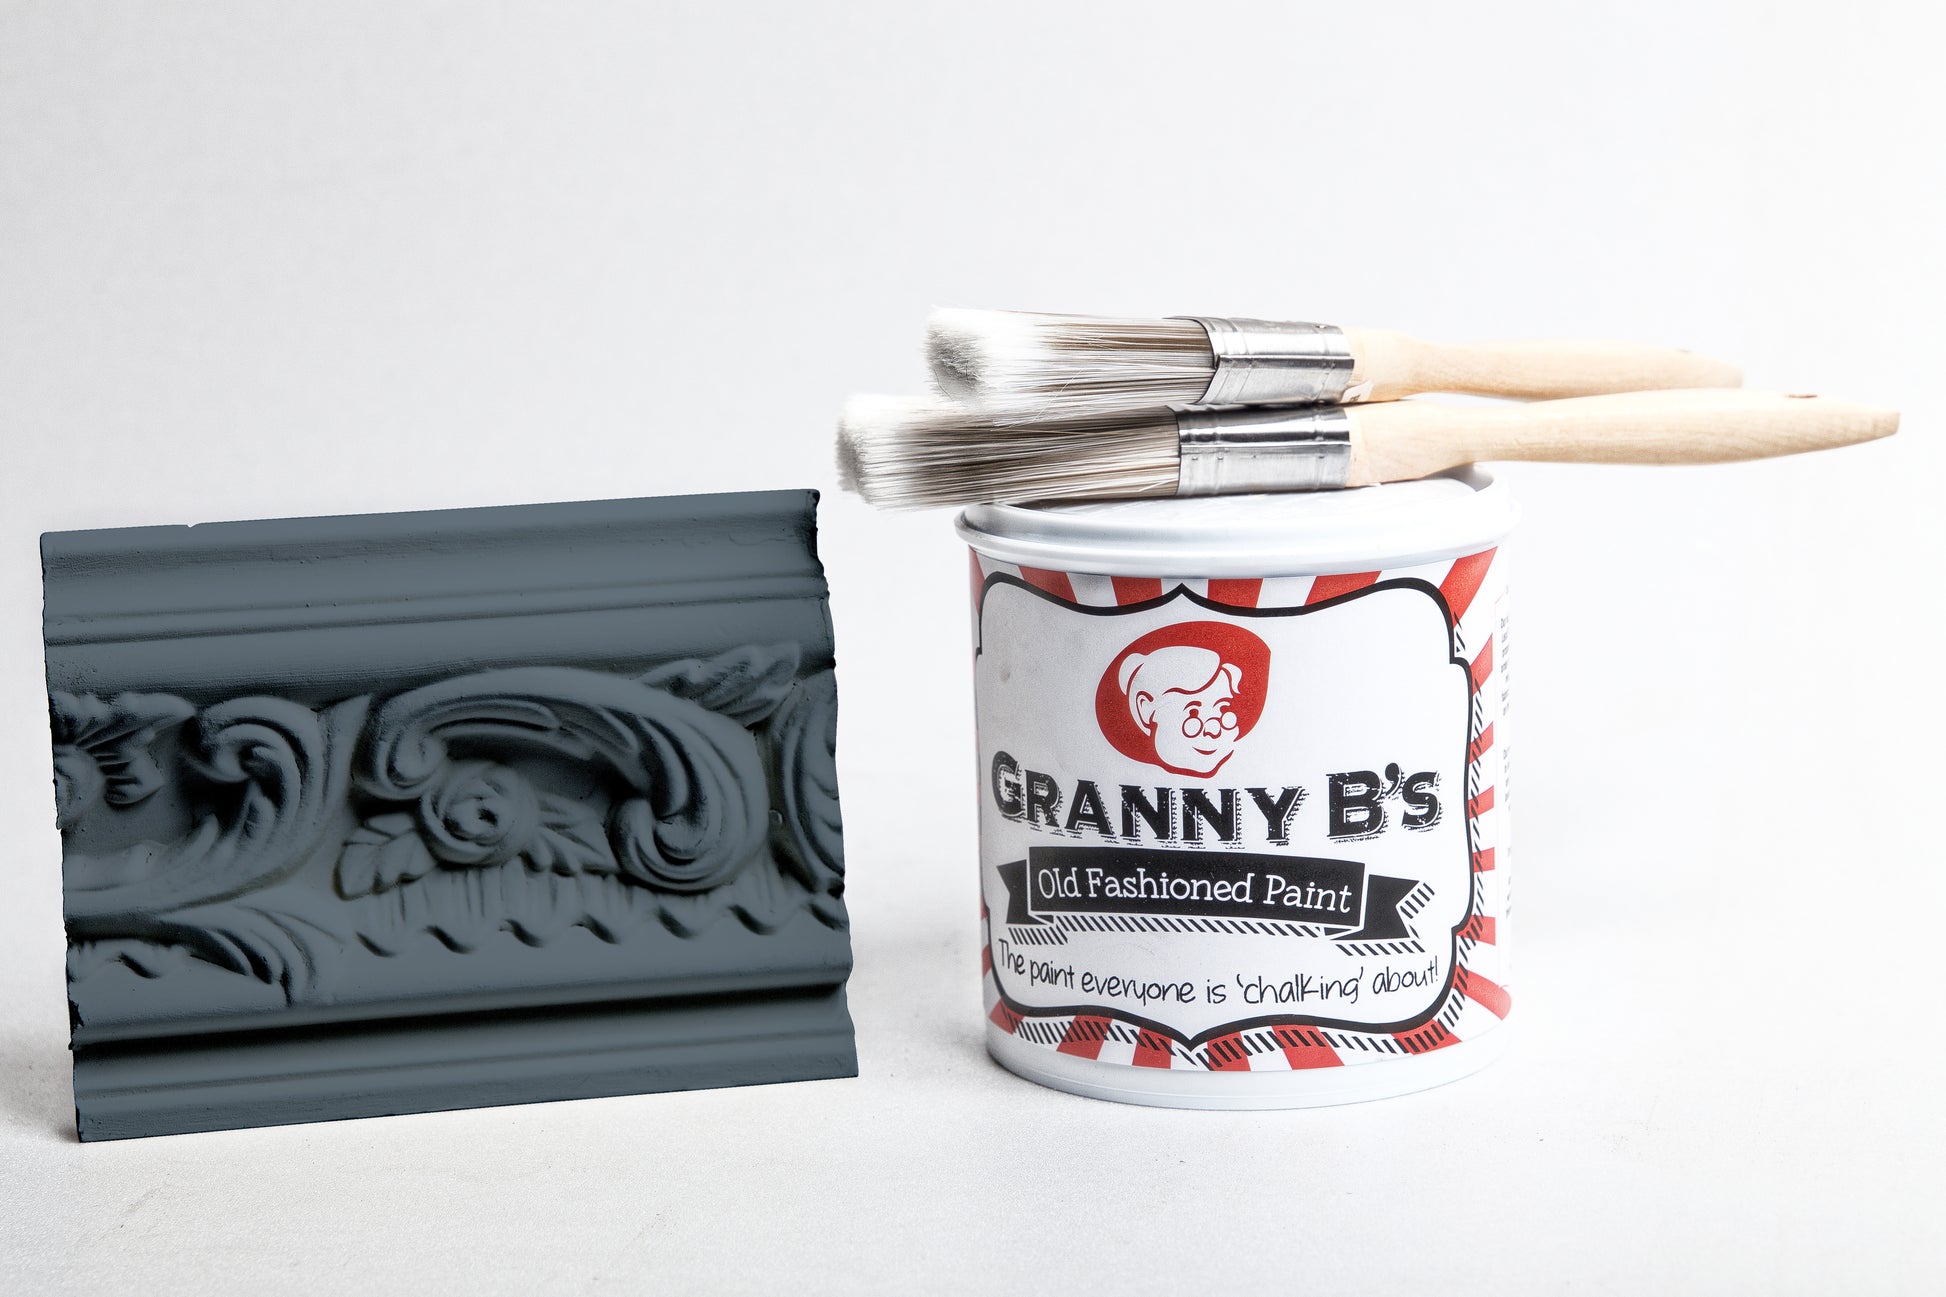 Old Fashioned Paint - Midnight Blue (Dark Blue) - Granny B's Old Fashioned Paint